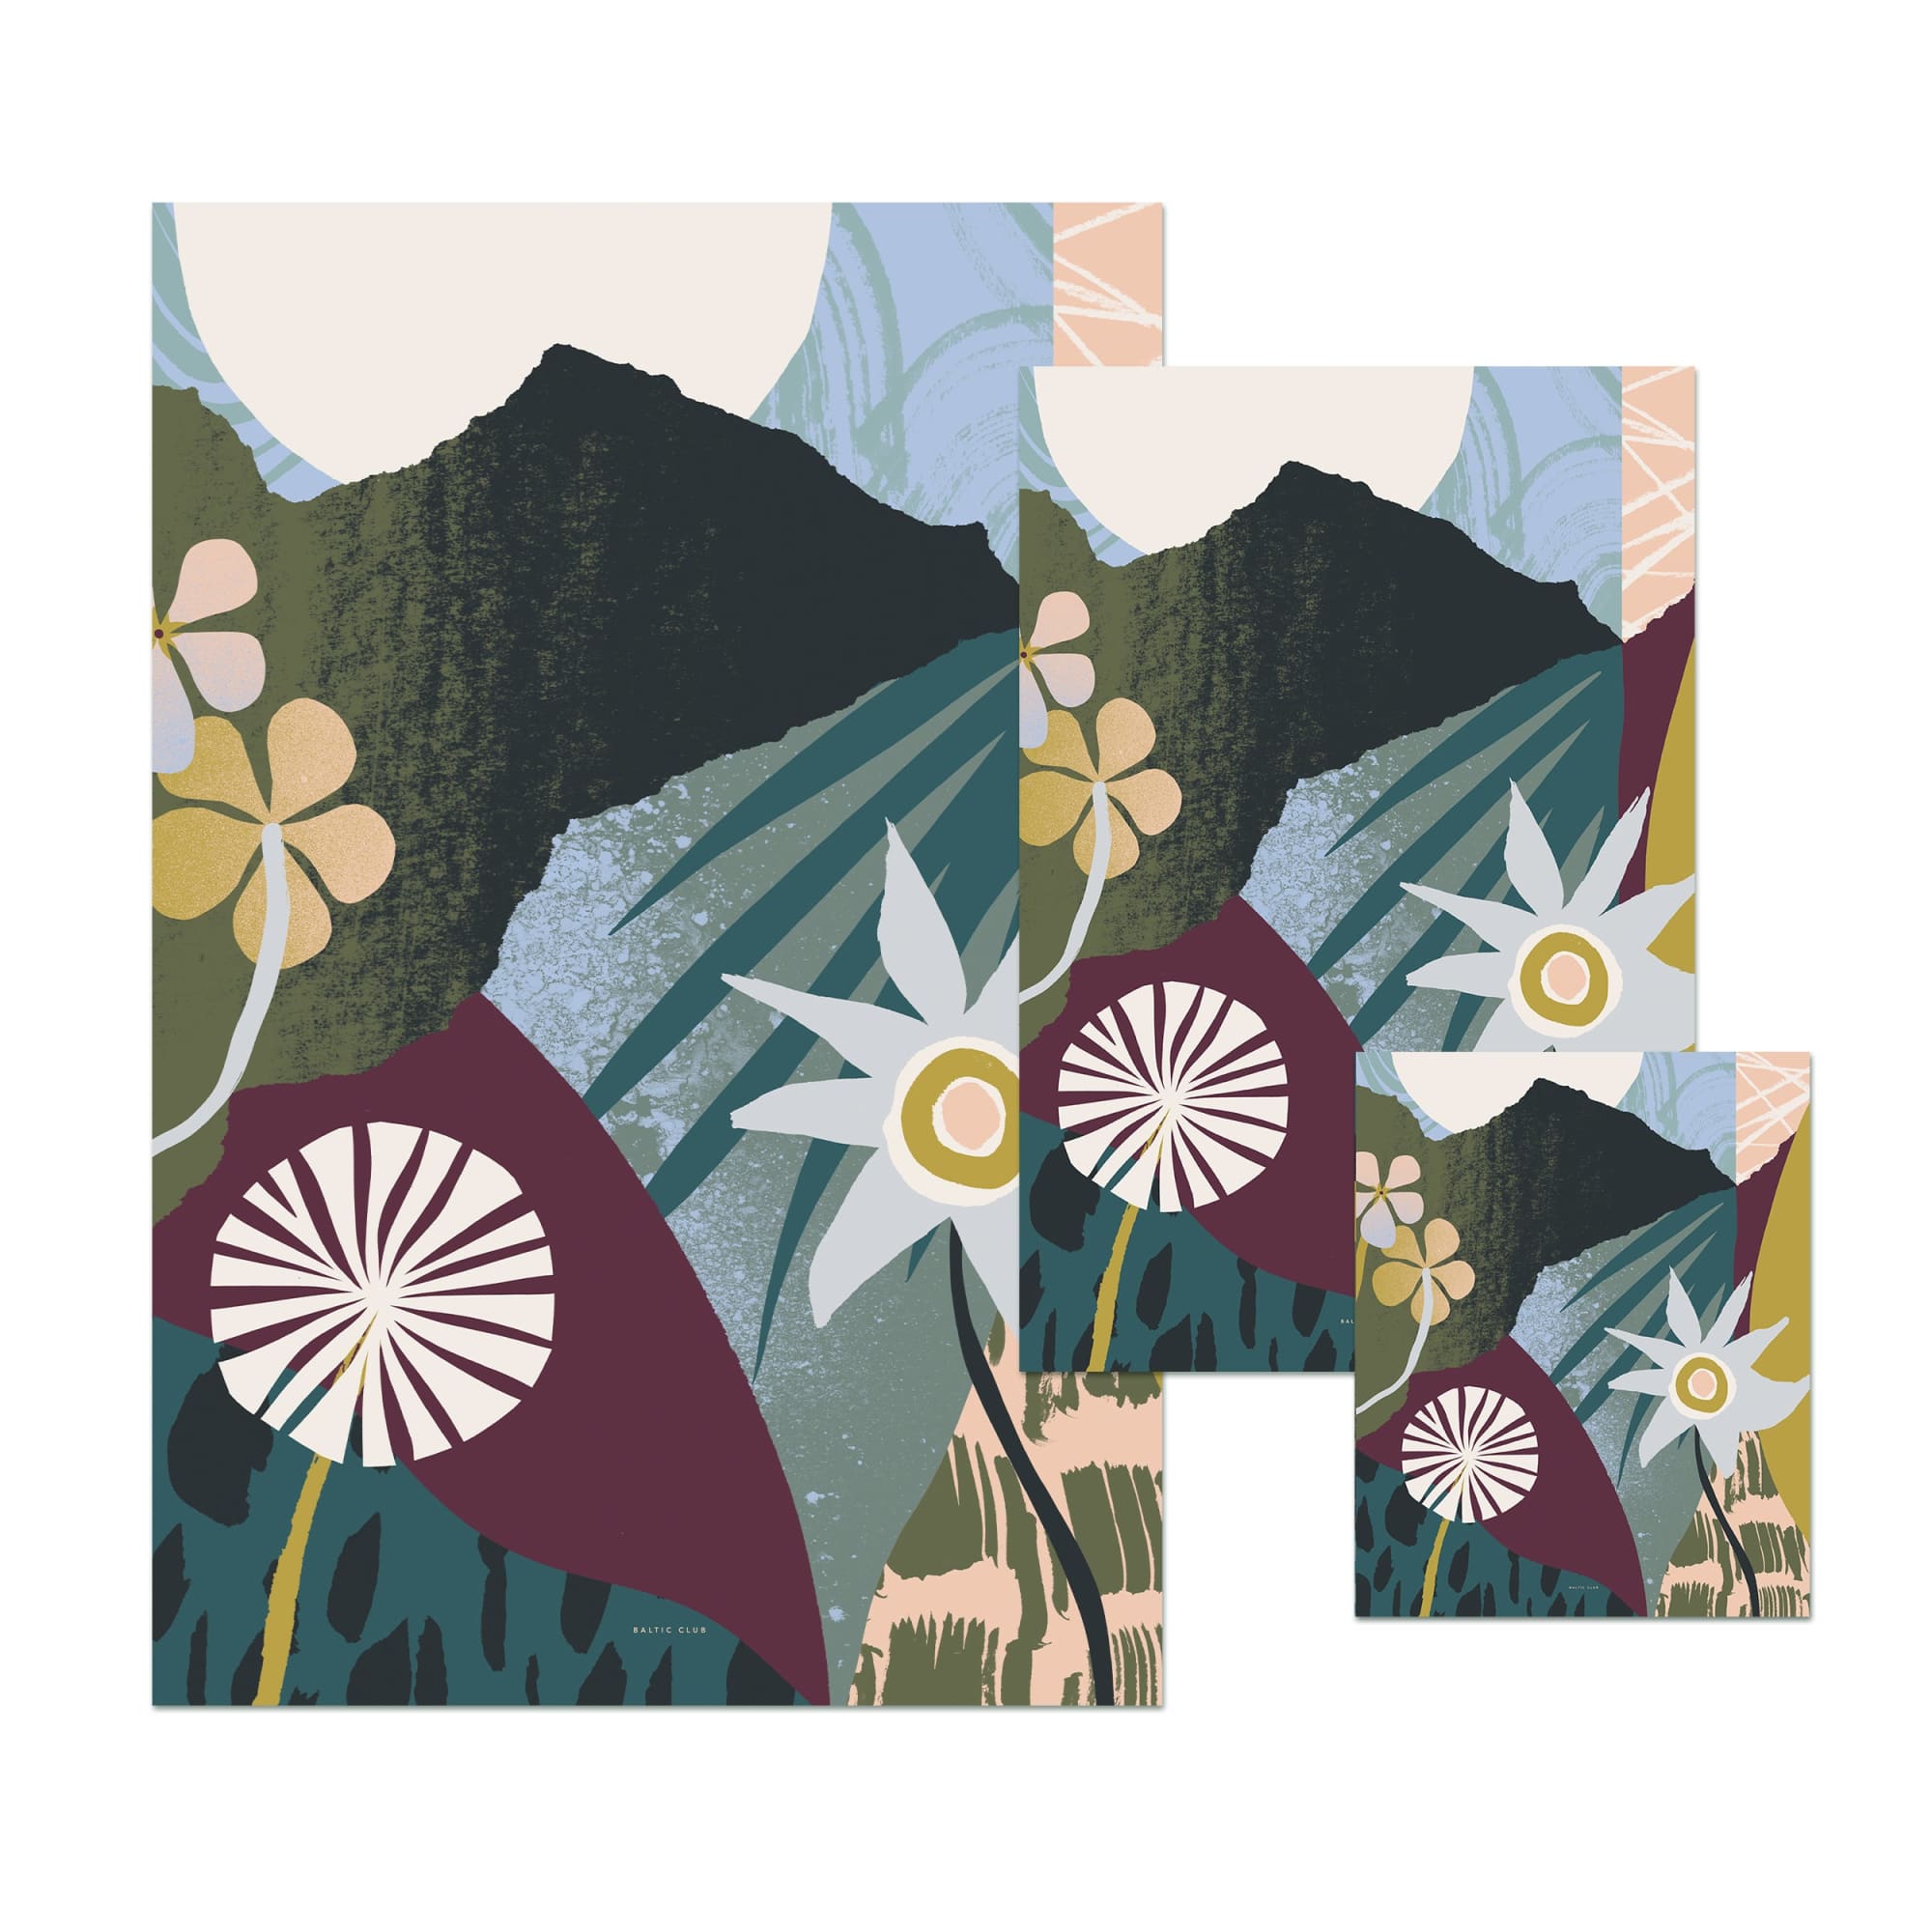 Meadow Art print | Tom Abbiss Smith